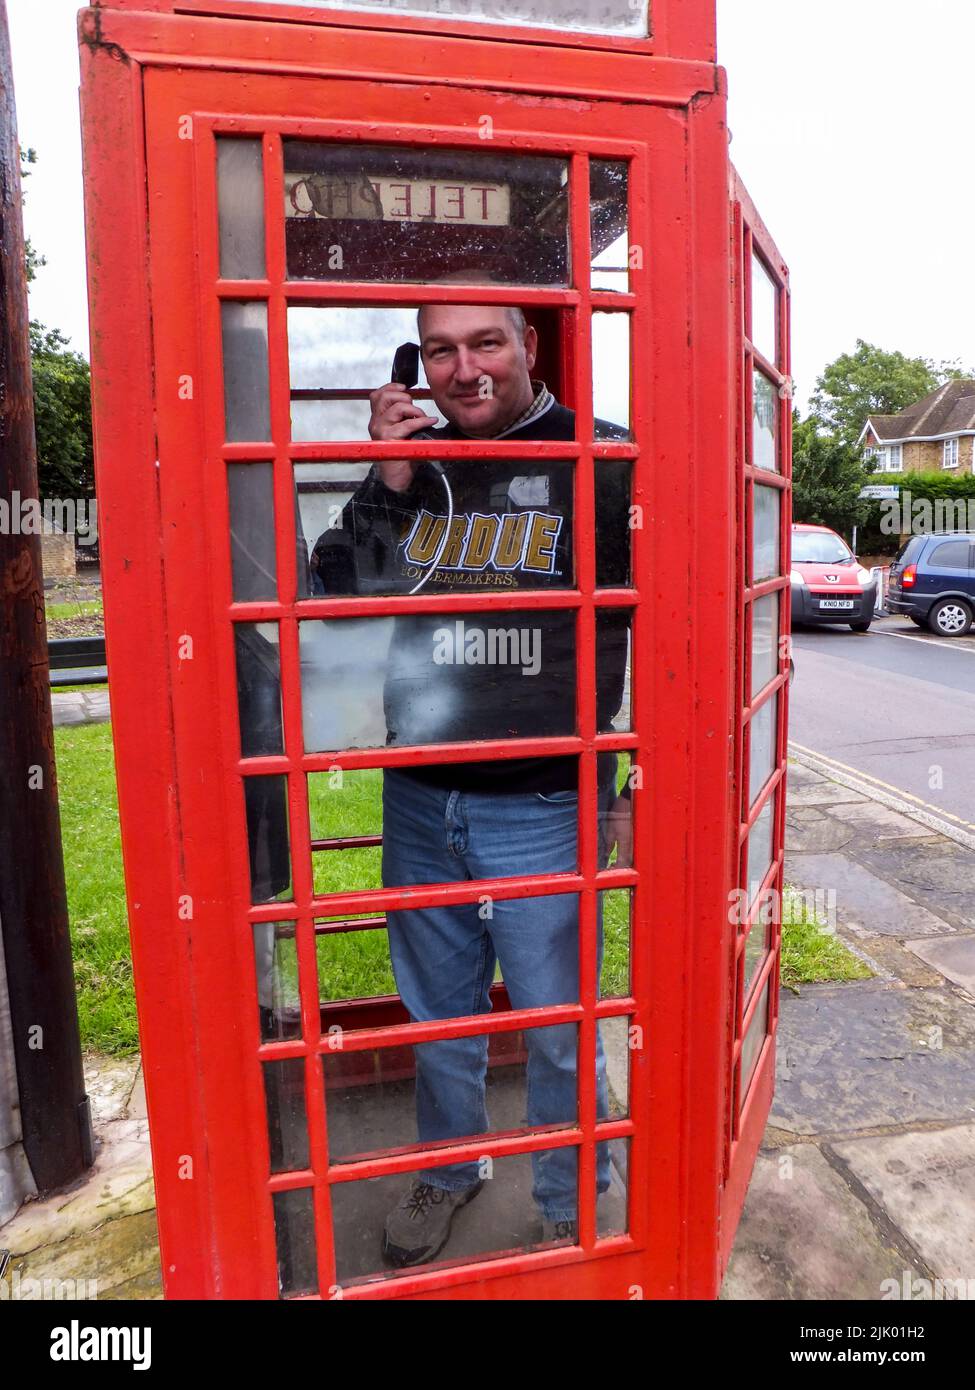 A man making a call in an iconic red telephone booth in Harmondsworth, Hillingdon, Middlesex, London, England, UK. Stock Photo